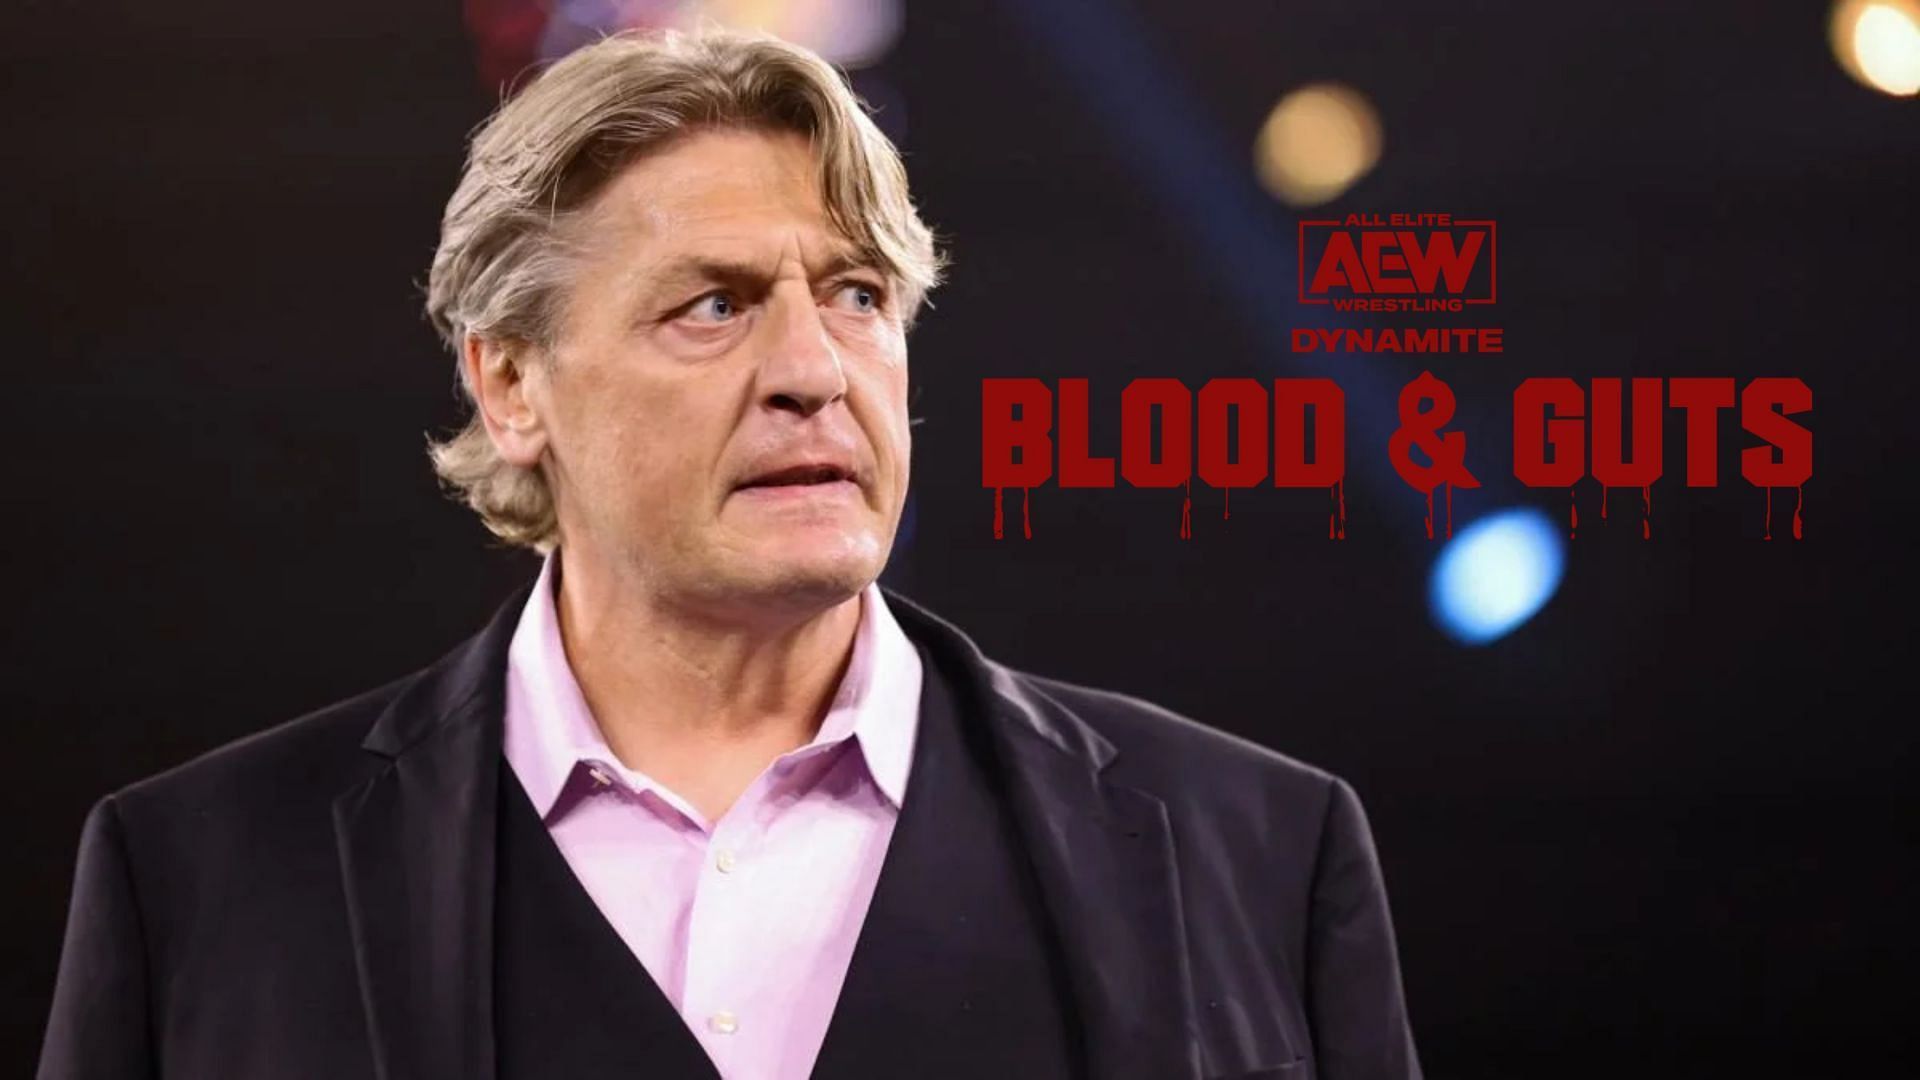 William Regal currently works for WWE in a backstage role.